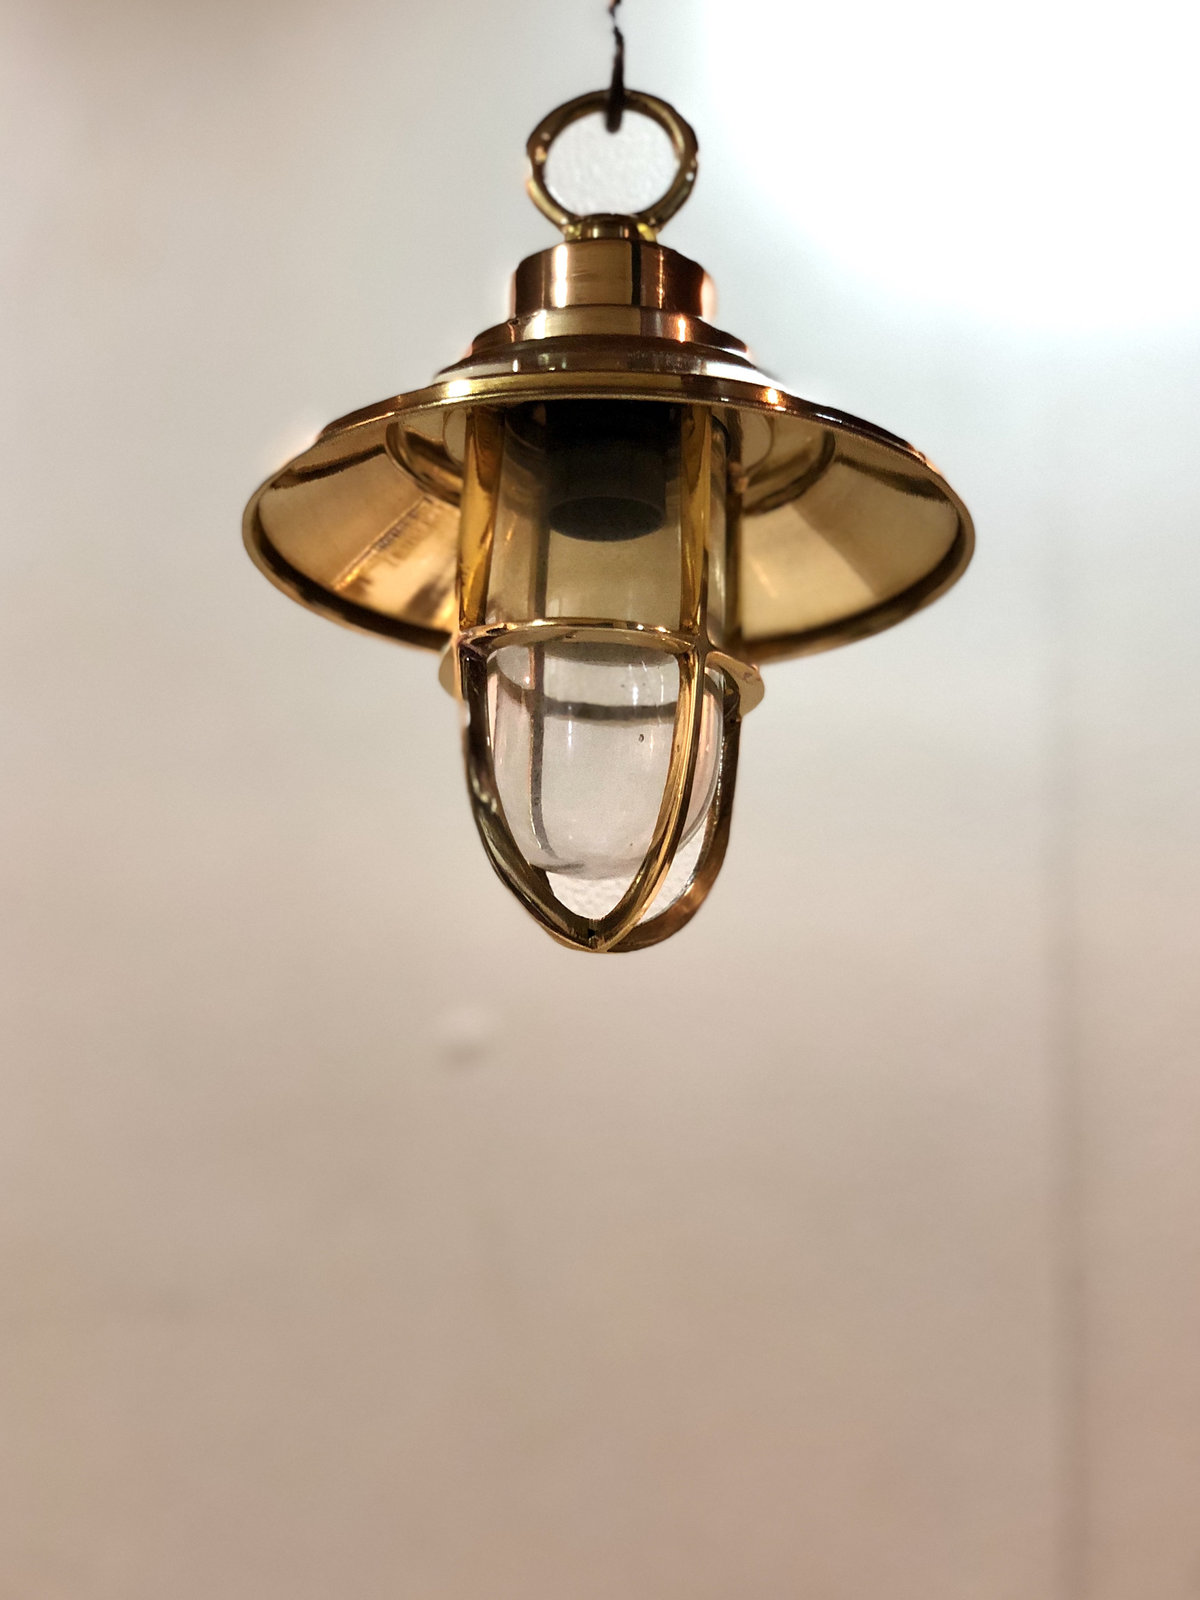 Beautiful Golden Ceiling Decor Solid Brass Pendant Light with Shade cap